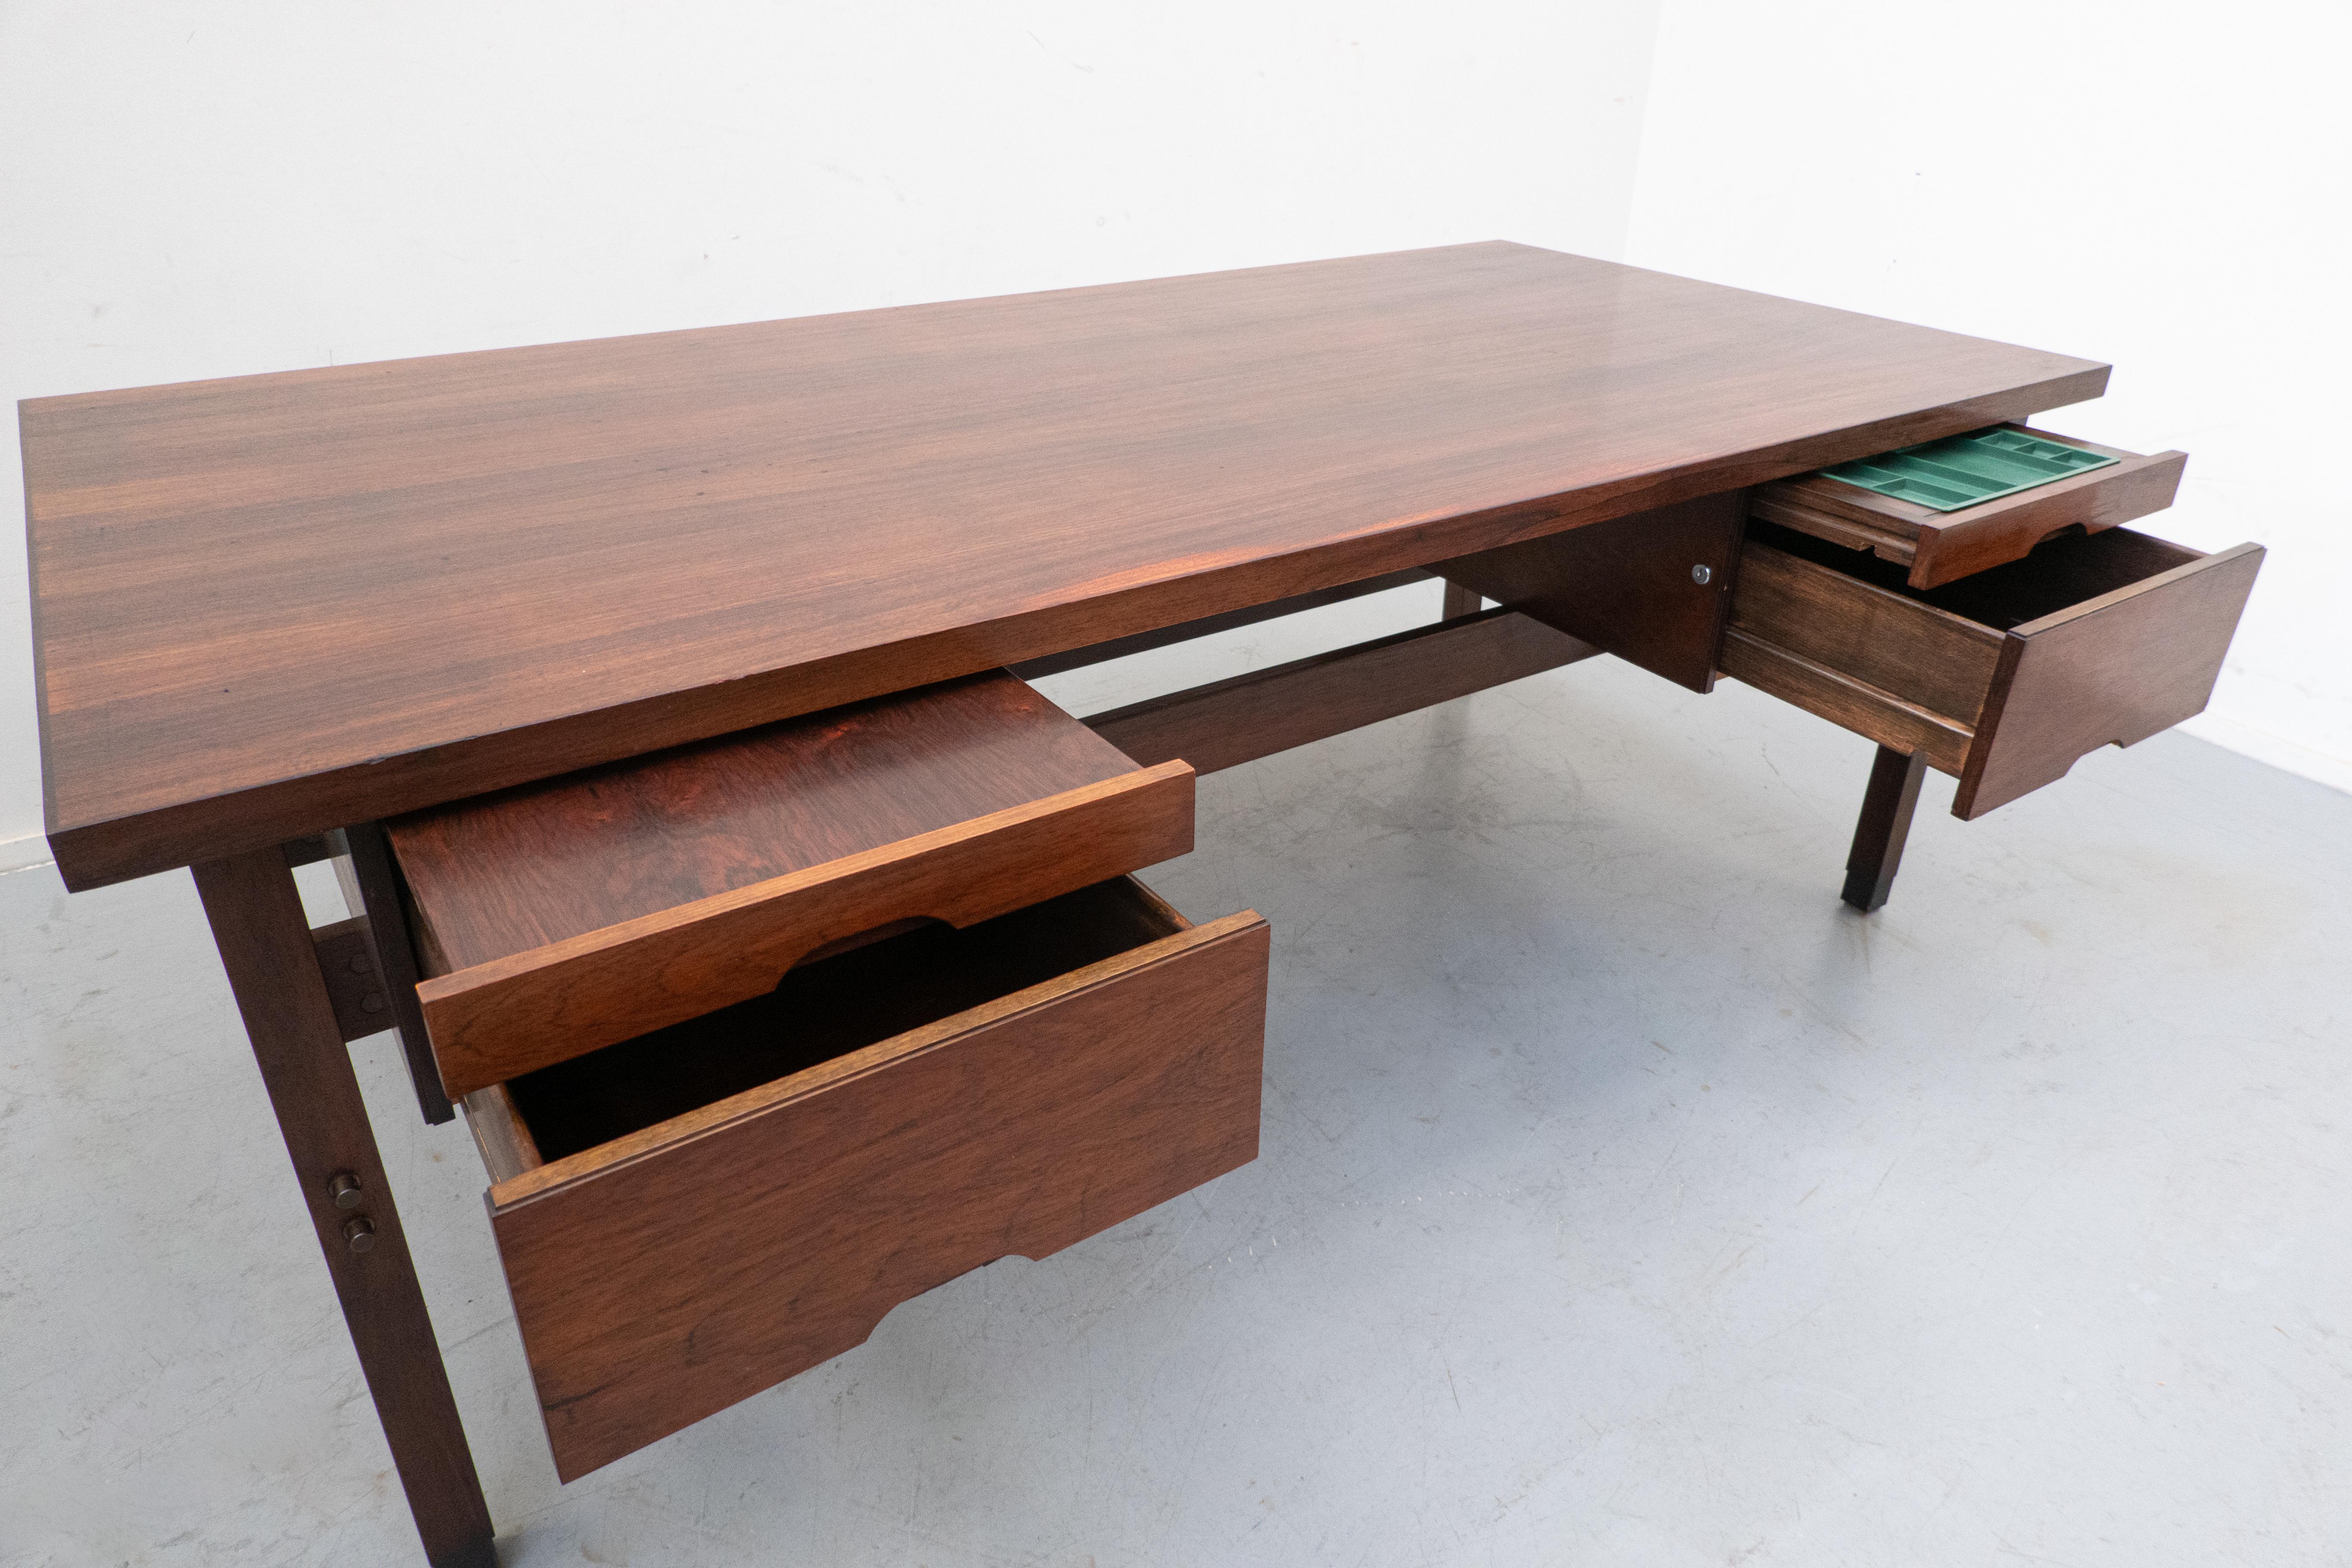 Brazilian Mid-Century Modern Wooden Desk by Sergio Rodrigues, Brazil, 1960s For Sale